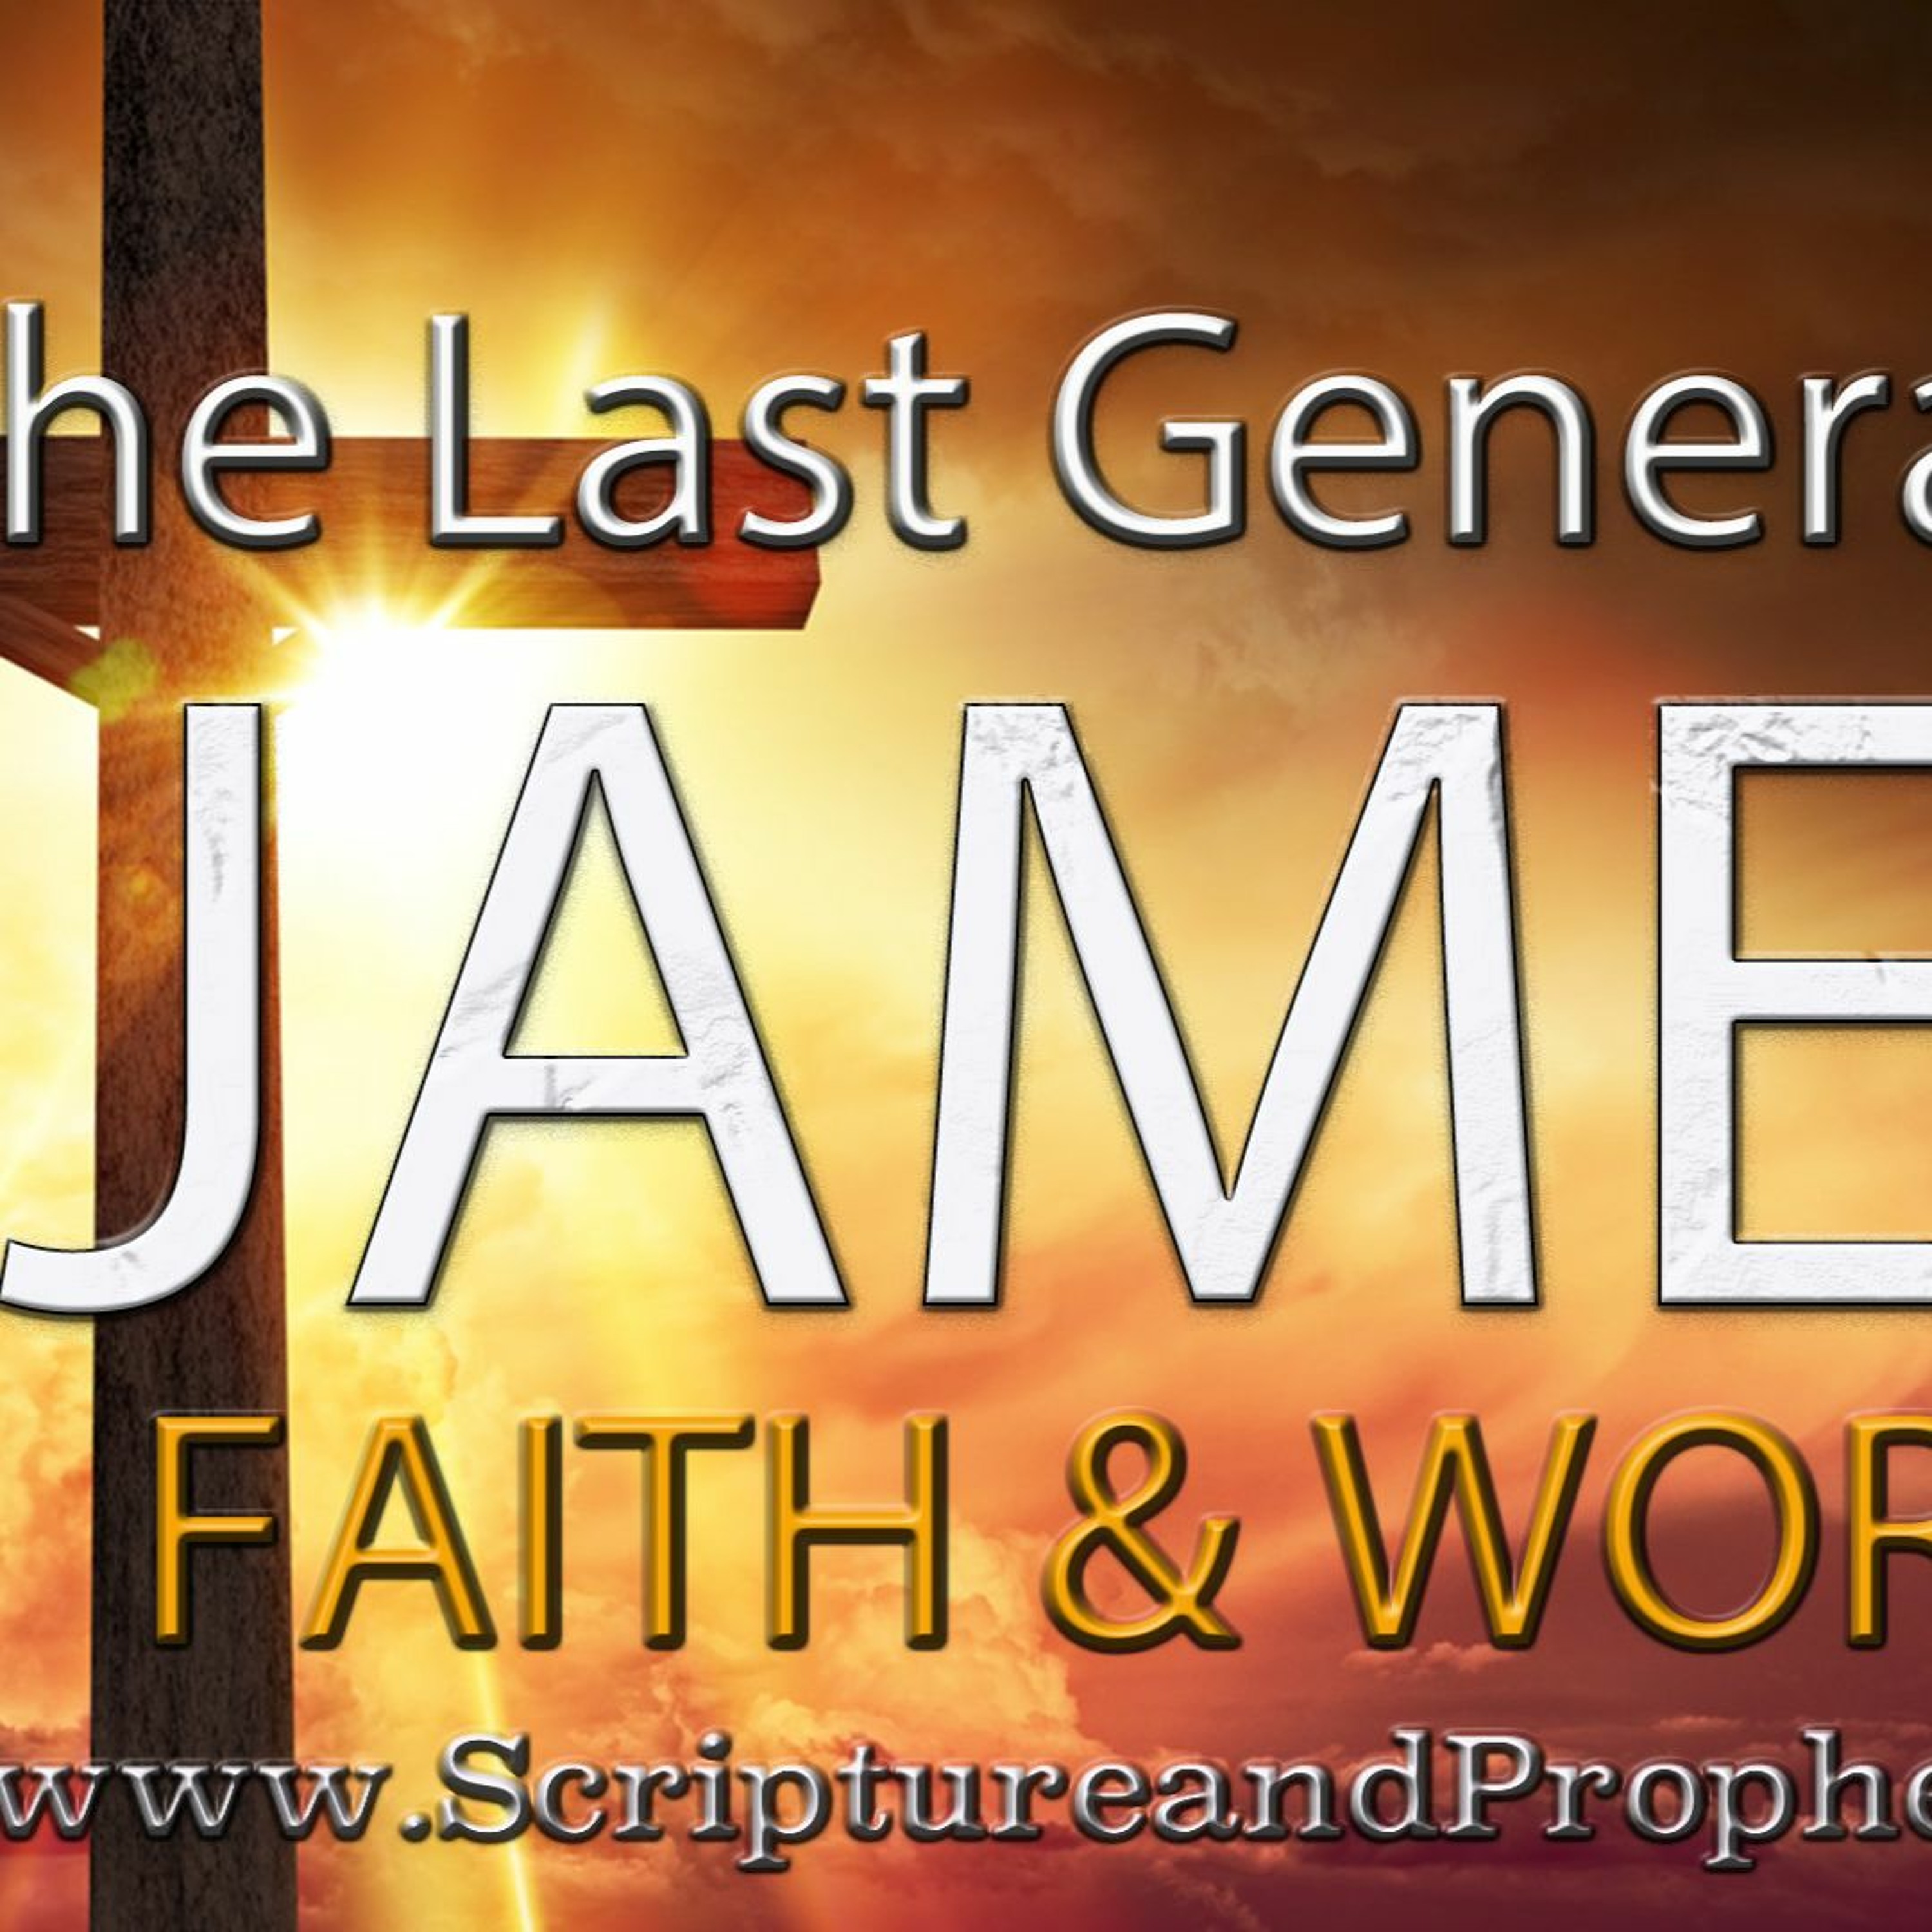 James - Faith & Works Chapter 1 - Don't Be Deceived, Your Actions Matter